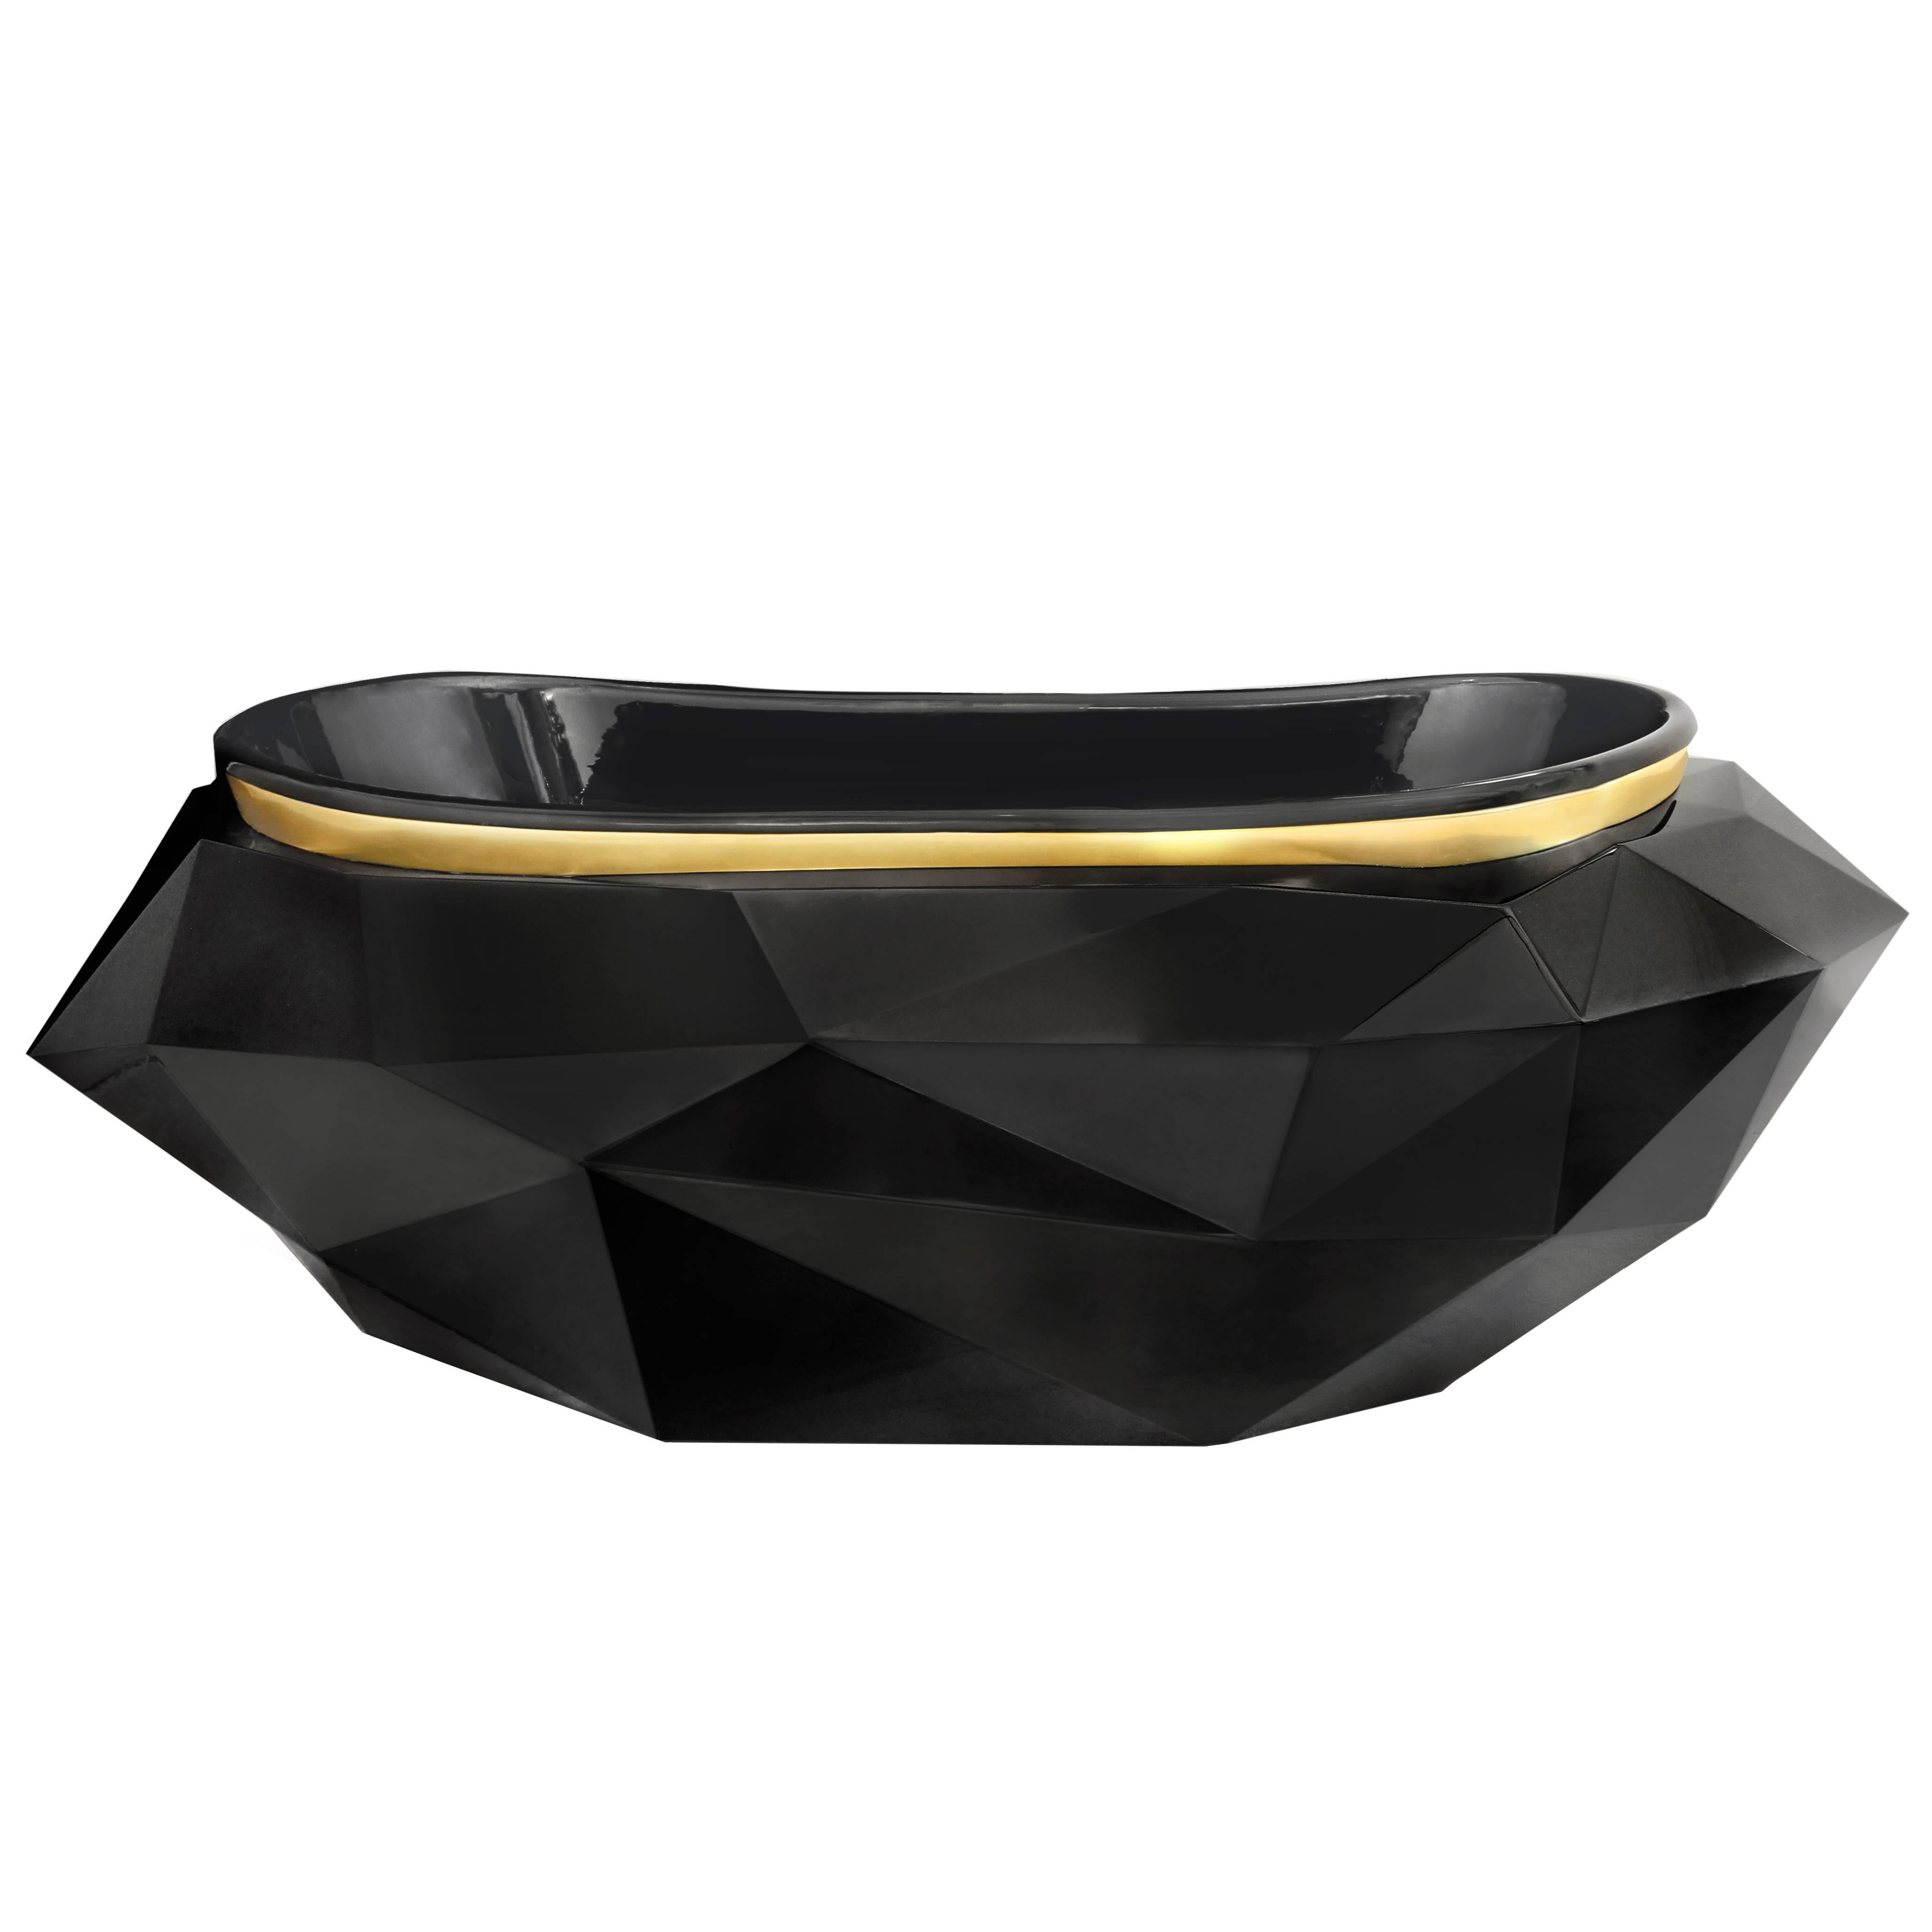 The ultimate luxurious addition to any bathroom, this exquisite geometric bathtub design is both contemporary and glamorous. It has clean lines and offers comfort whilst keeping an exclusive bold look. It's shape will become timeless like a cut